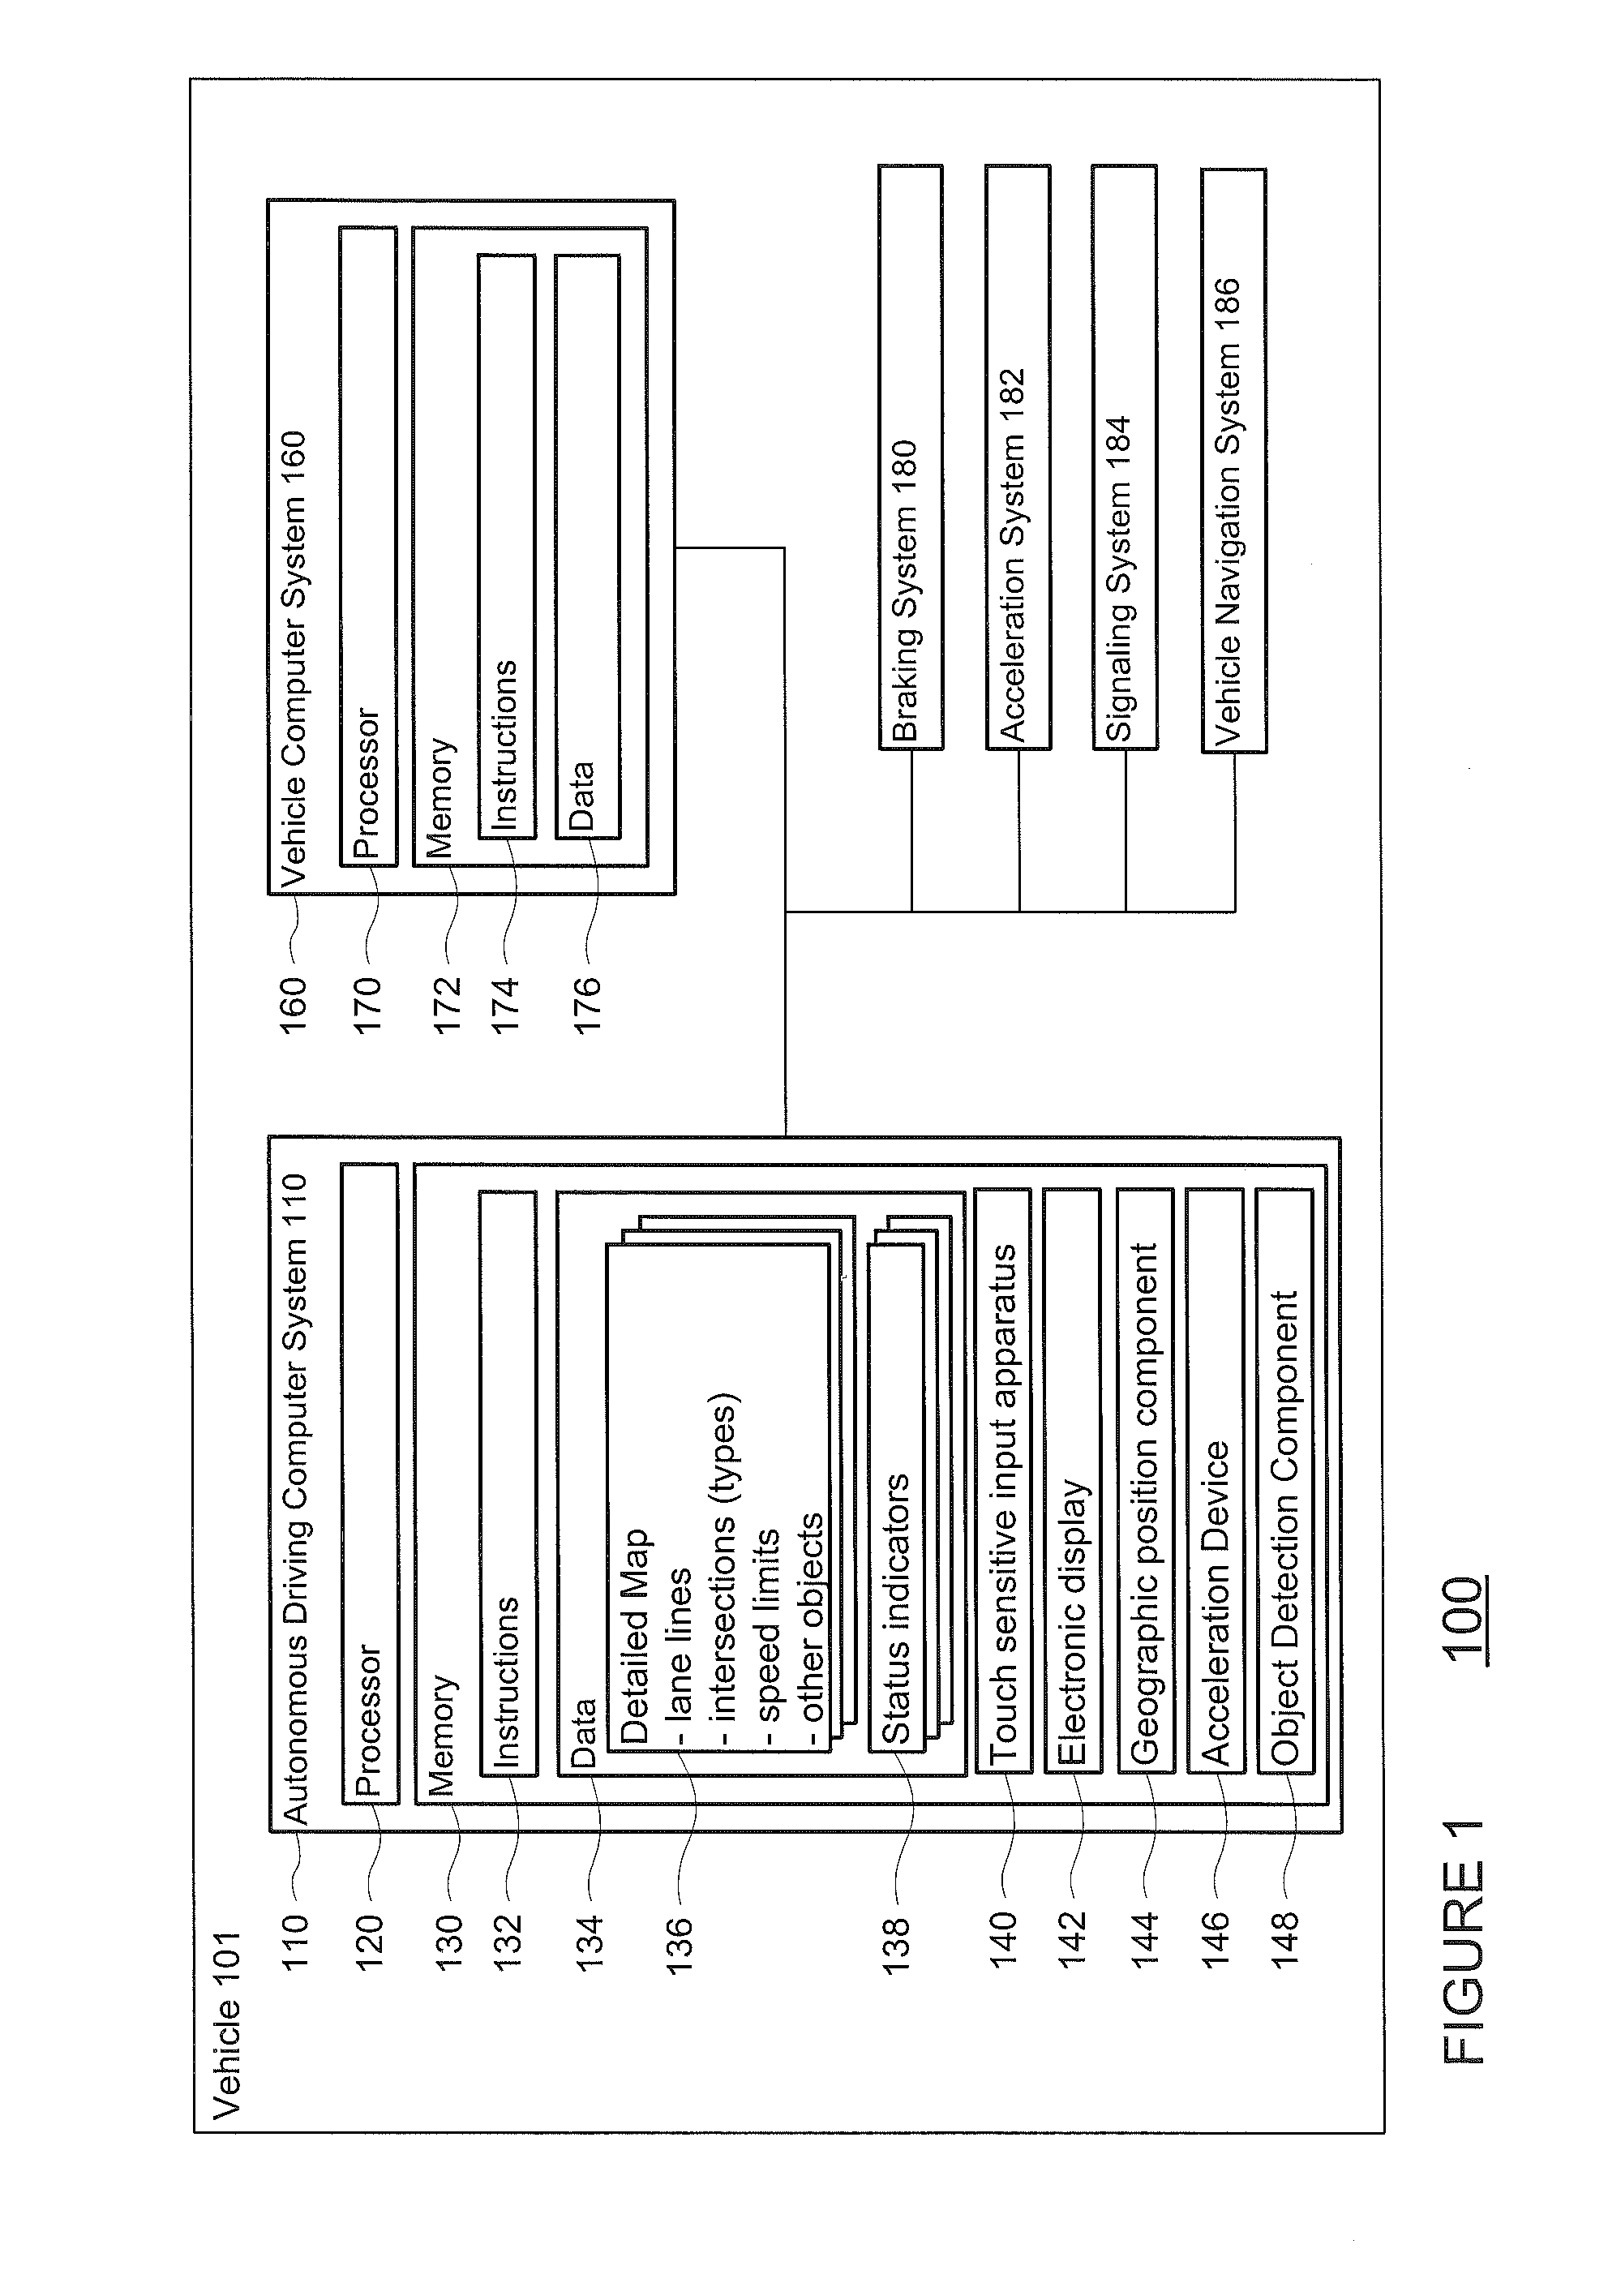 User interface for displaying internal state of autonomous driving system